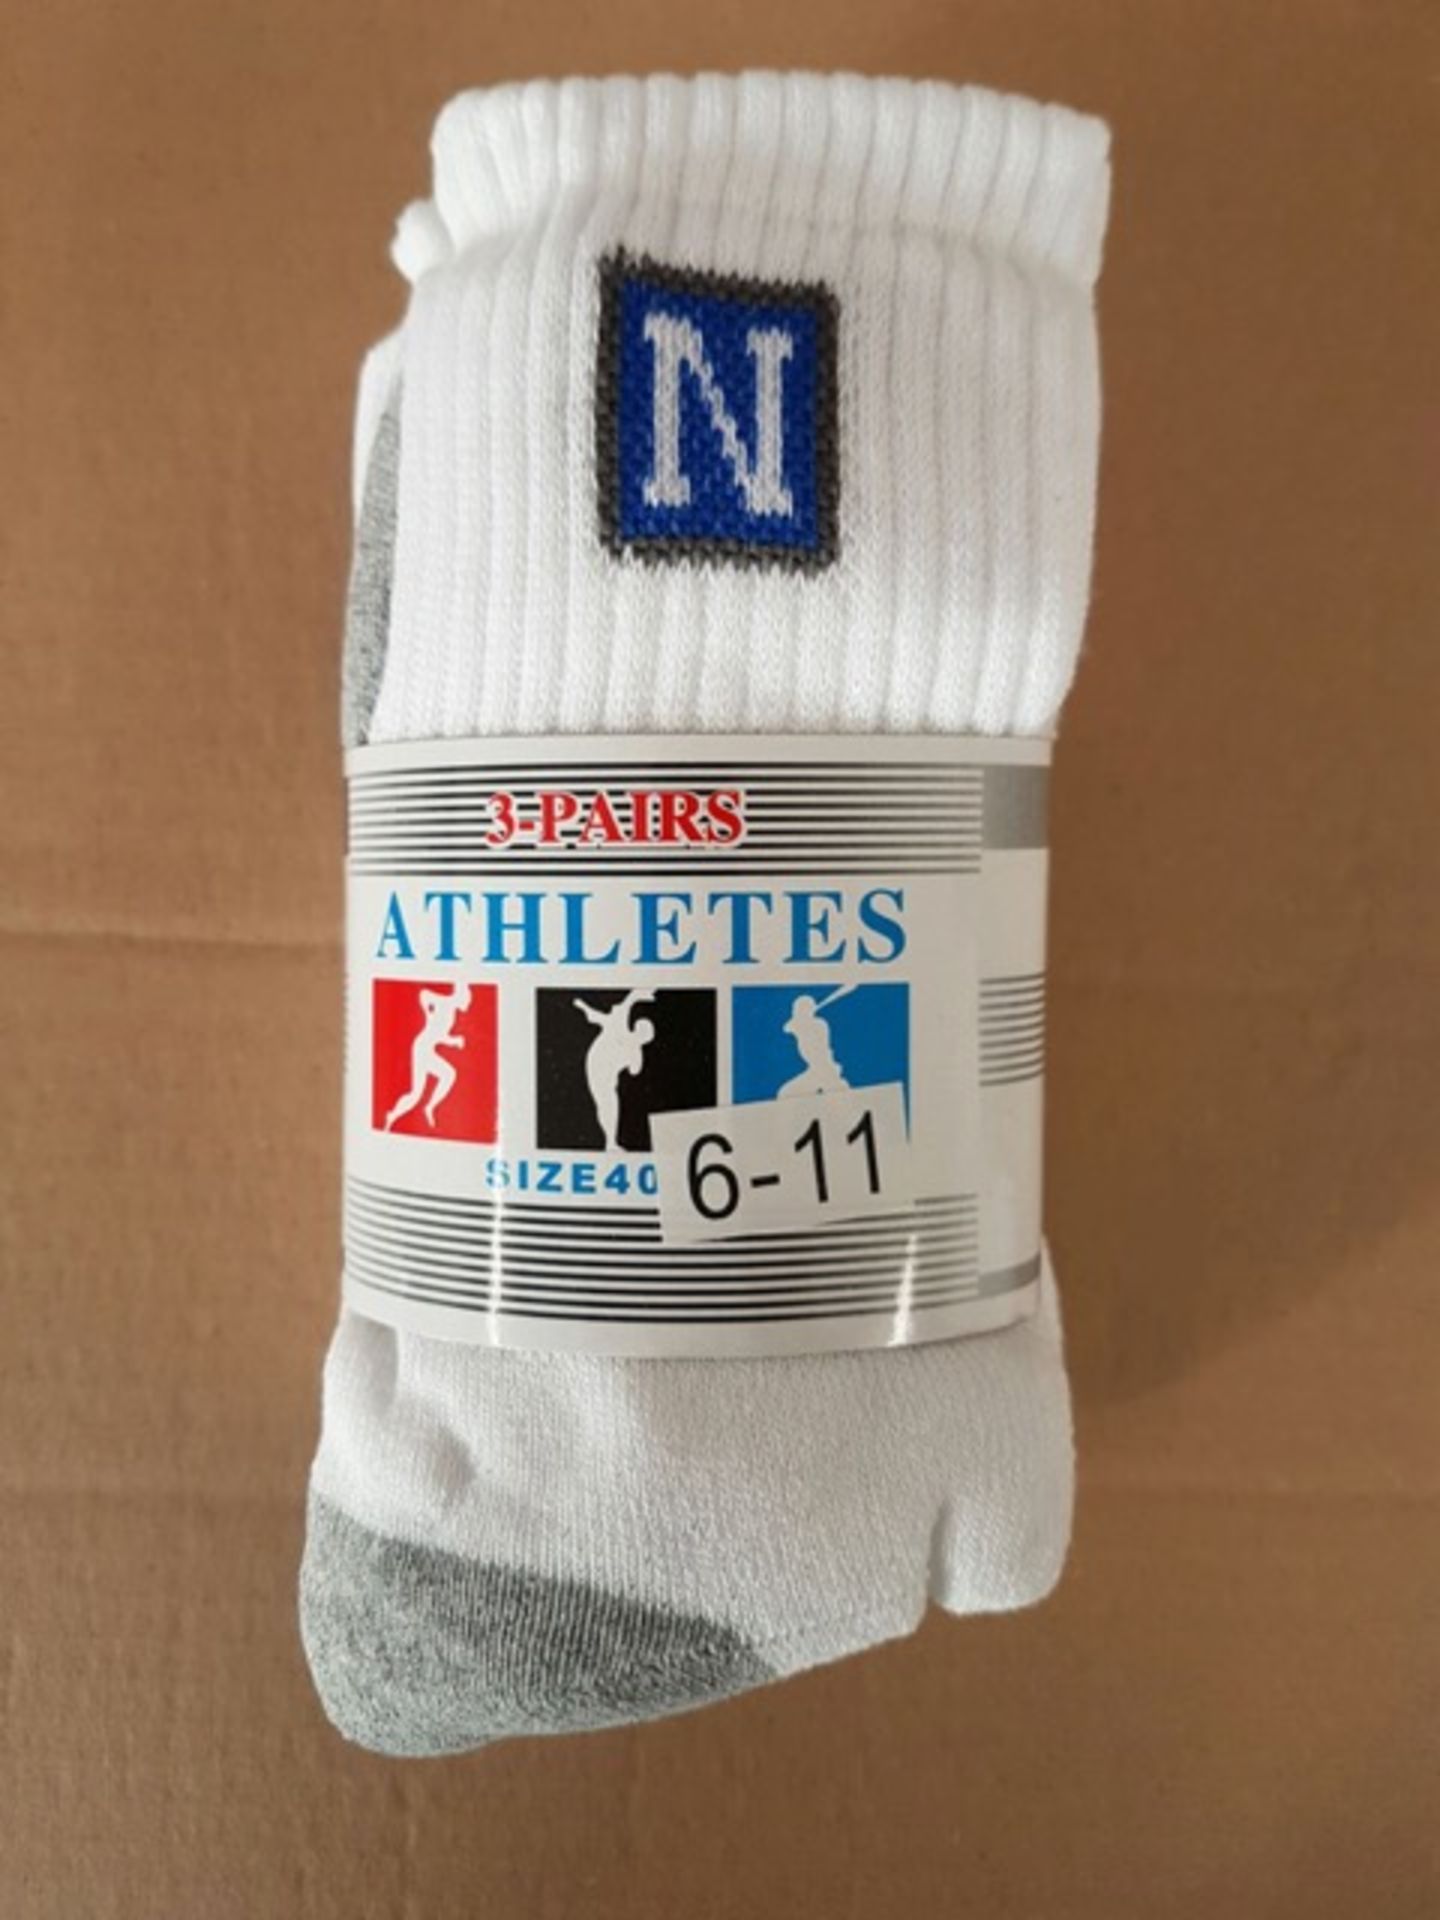 40 x Brand New Packs of 3 High Quality Sports Socks. Size Adult 6-11. Price marked at £5.99 per pack